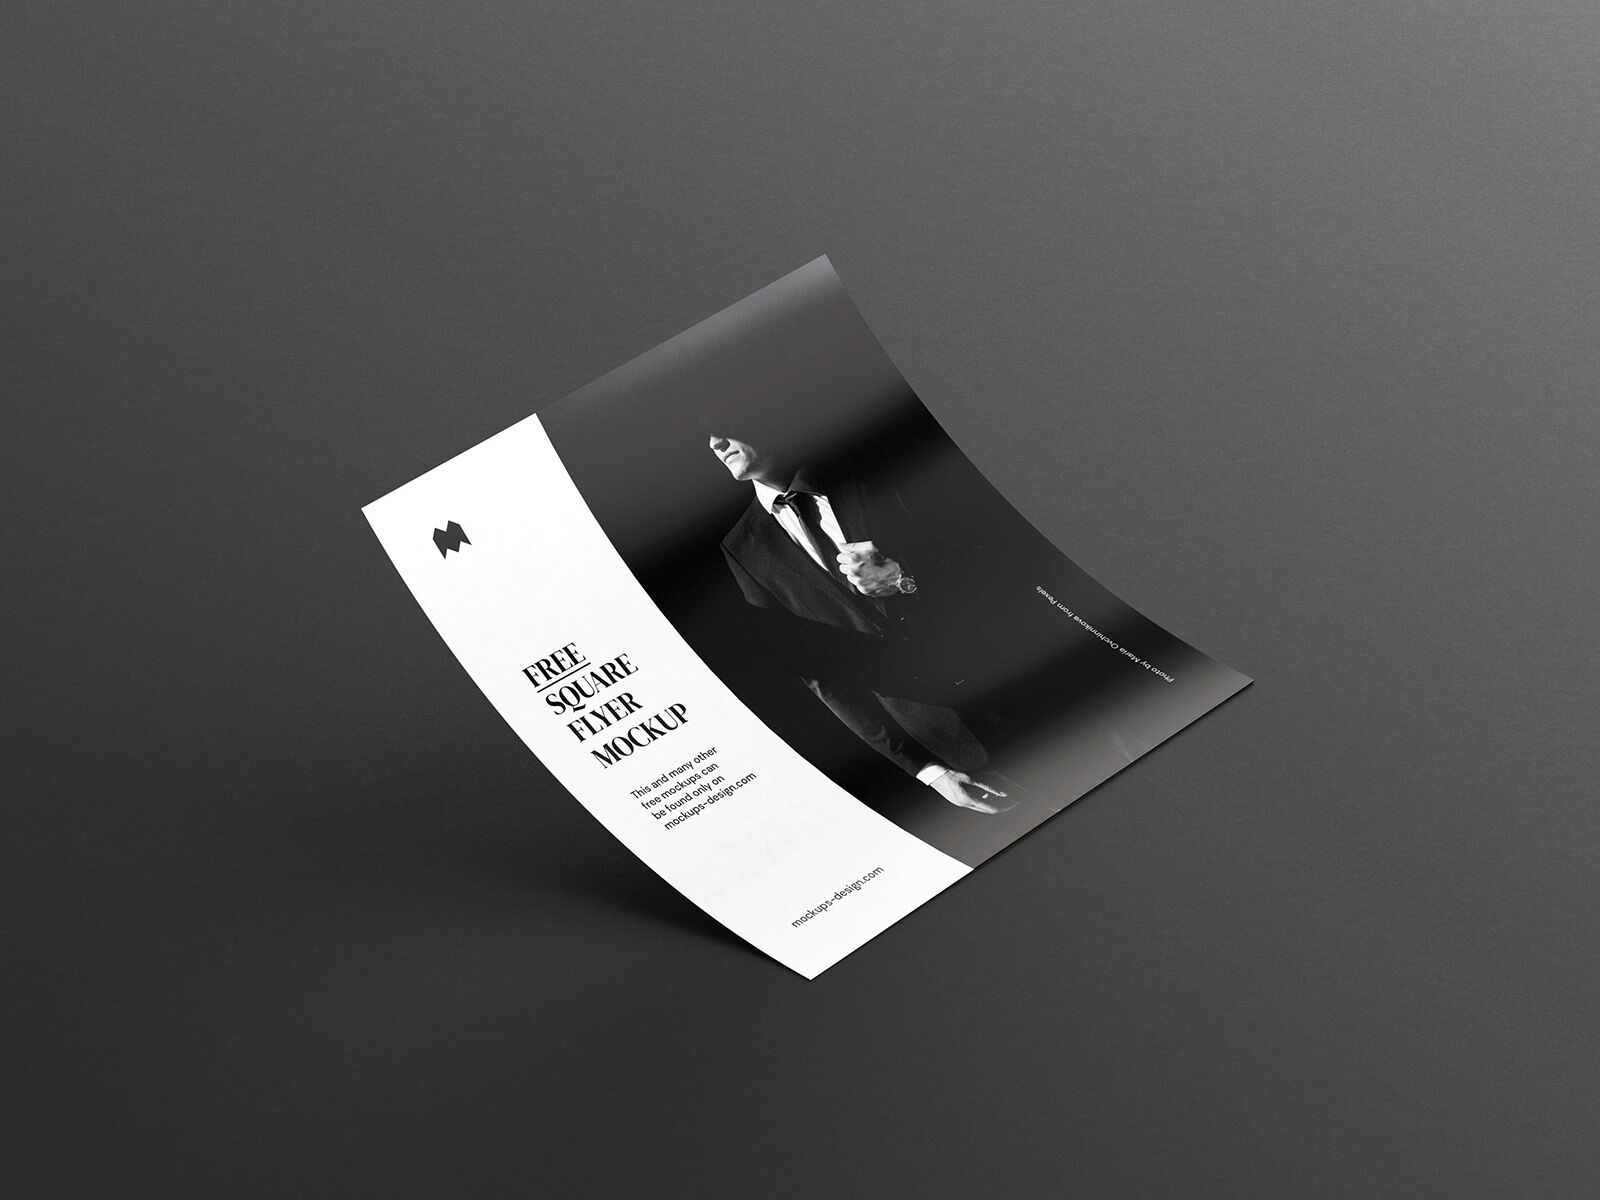 Six Mockups of Square Flyers in Different Angles FREE PSD